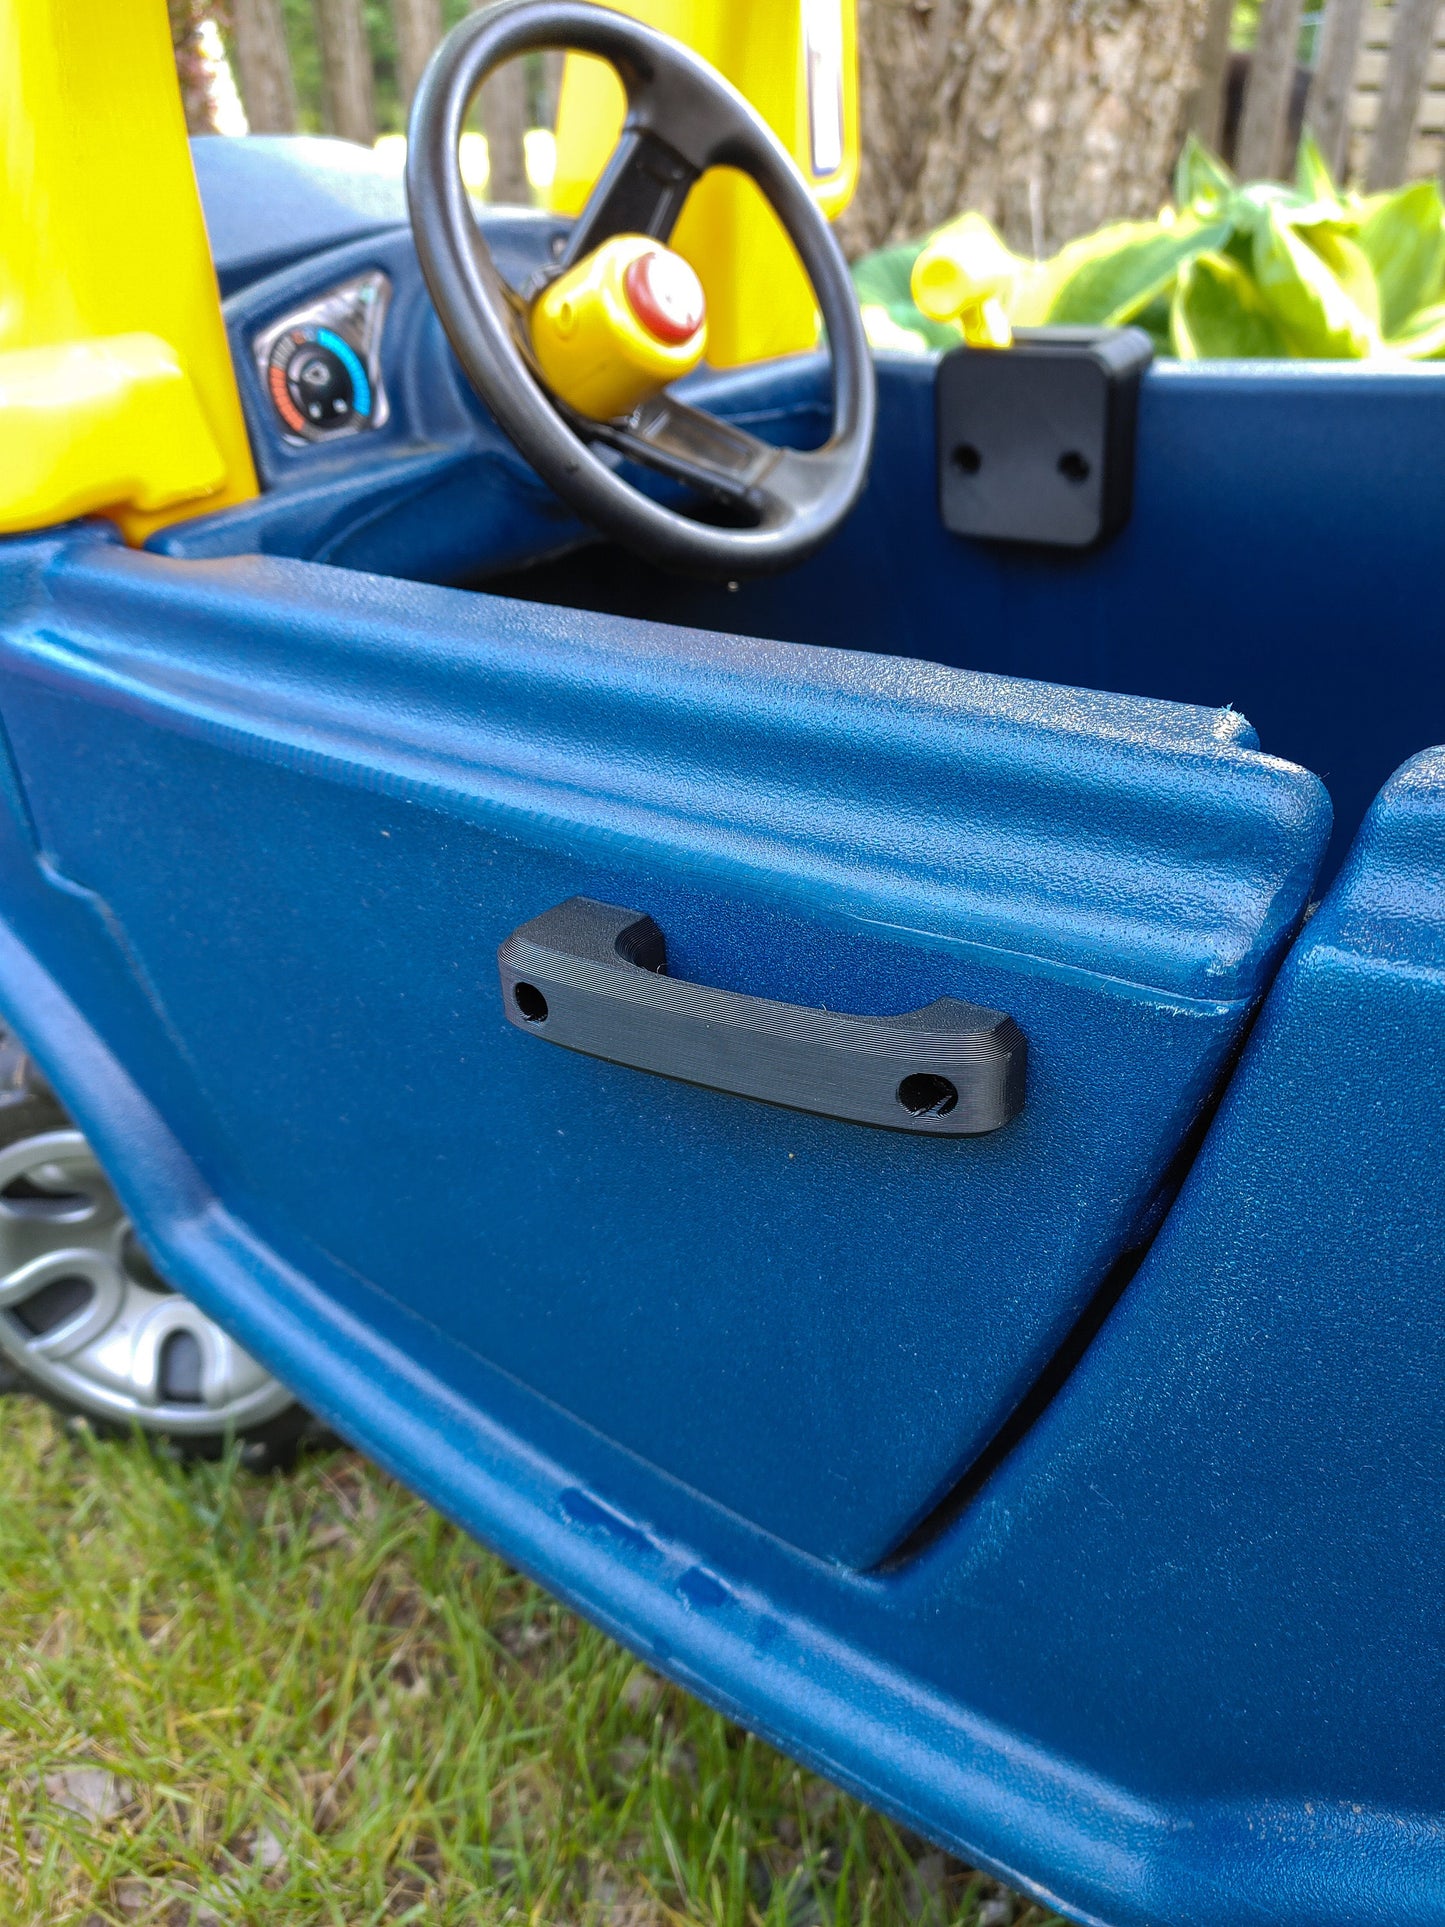 Door Handles Designed to be Compatible with the Little Tikes Cozy Coupe and Cozy Truck